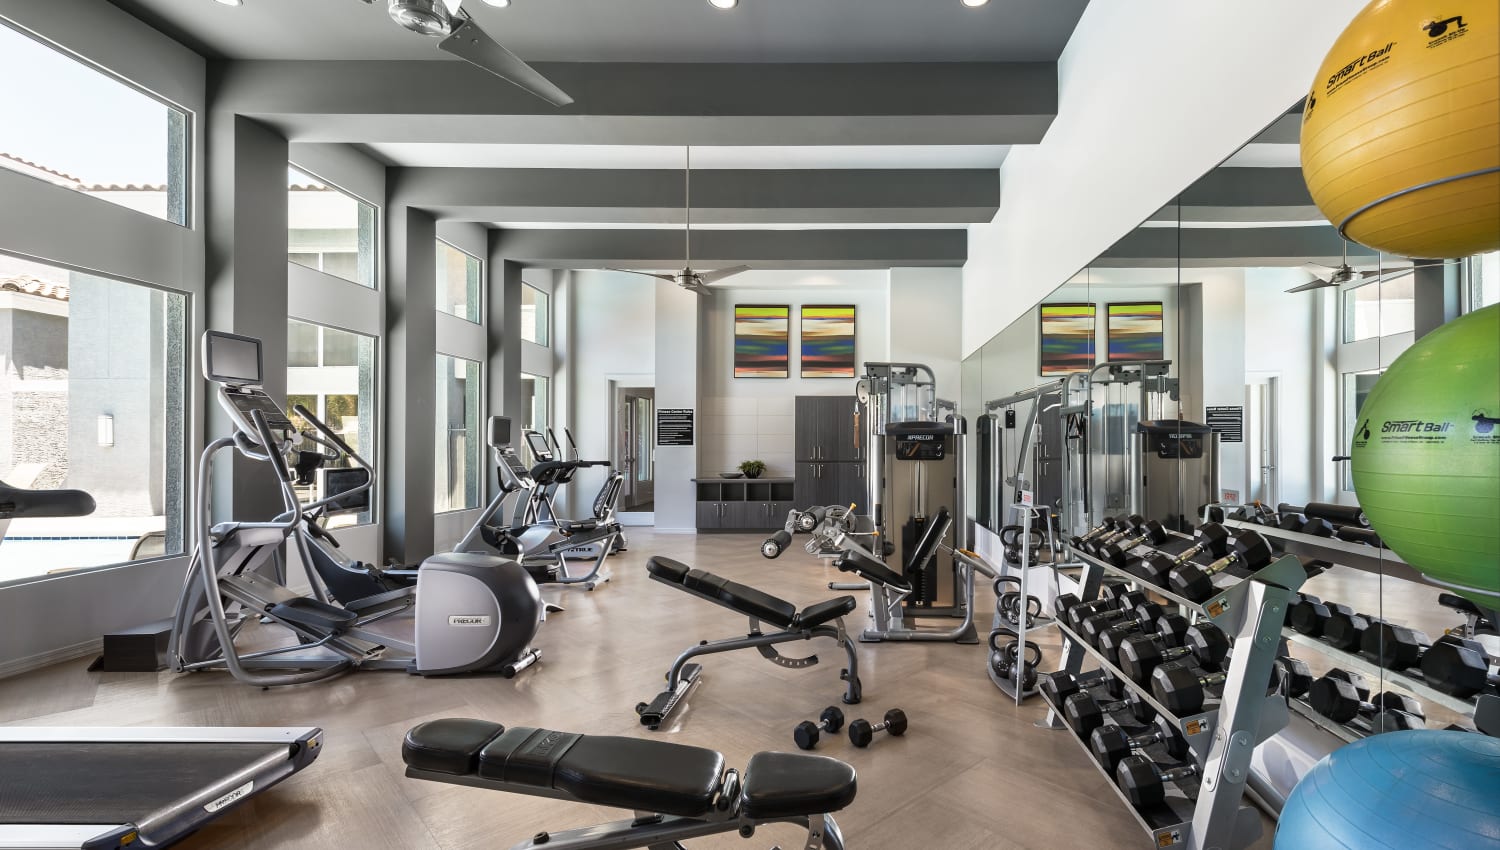 State of the art fitness center at Avenue 25 in Phoenix, Arizona